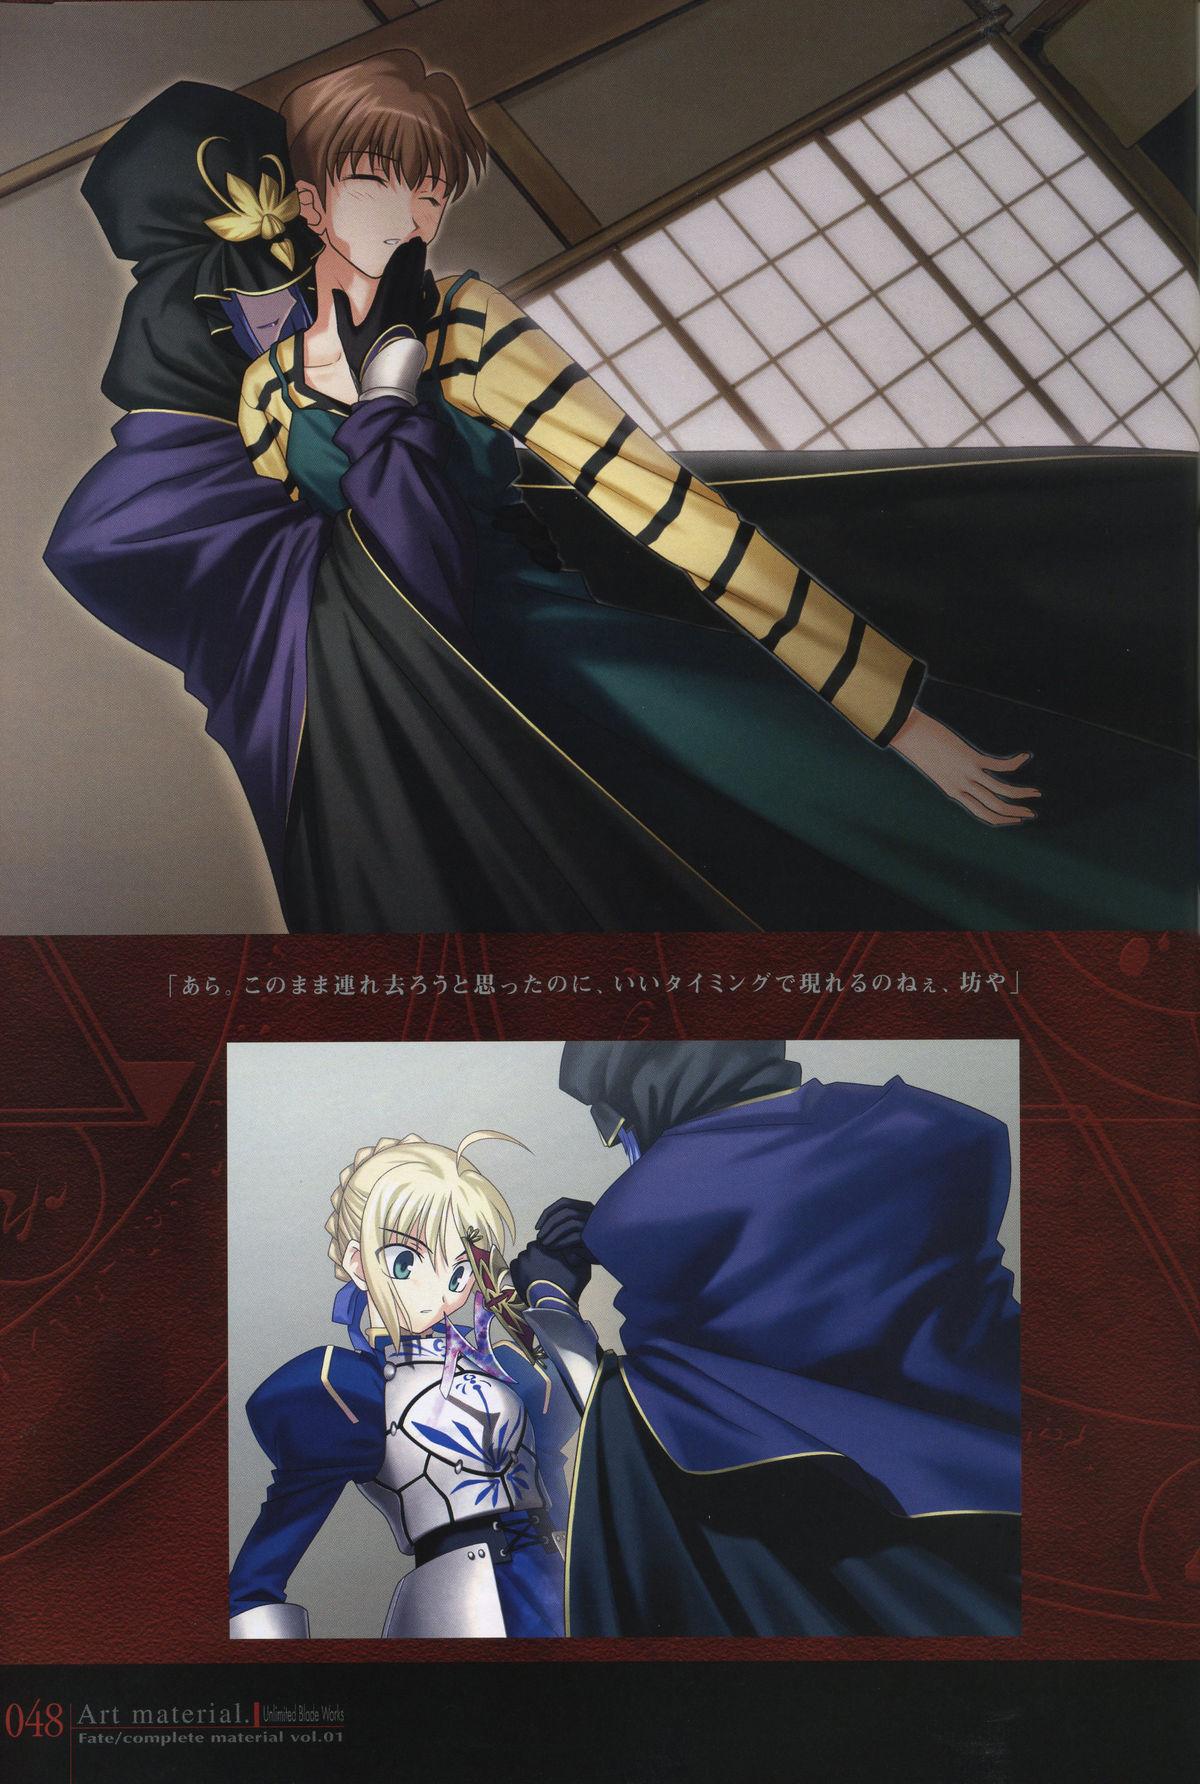 Fate/complete material I - Art material. 52